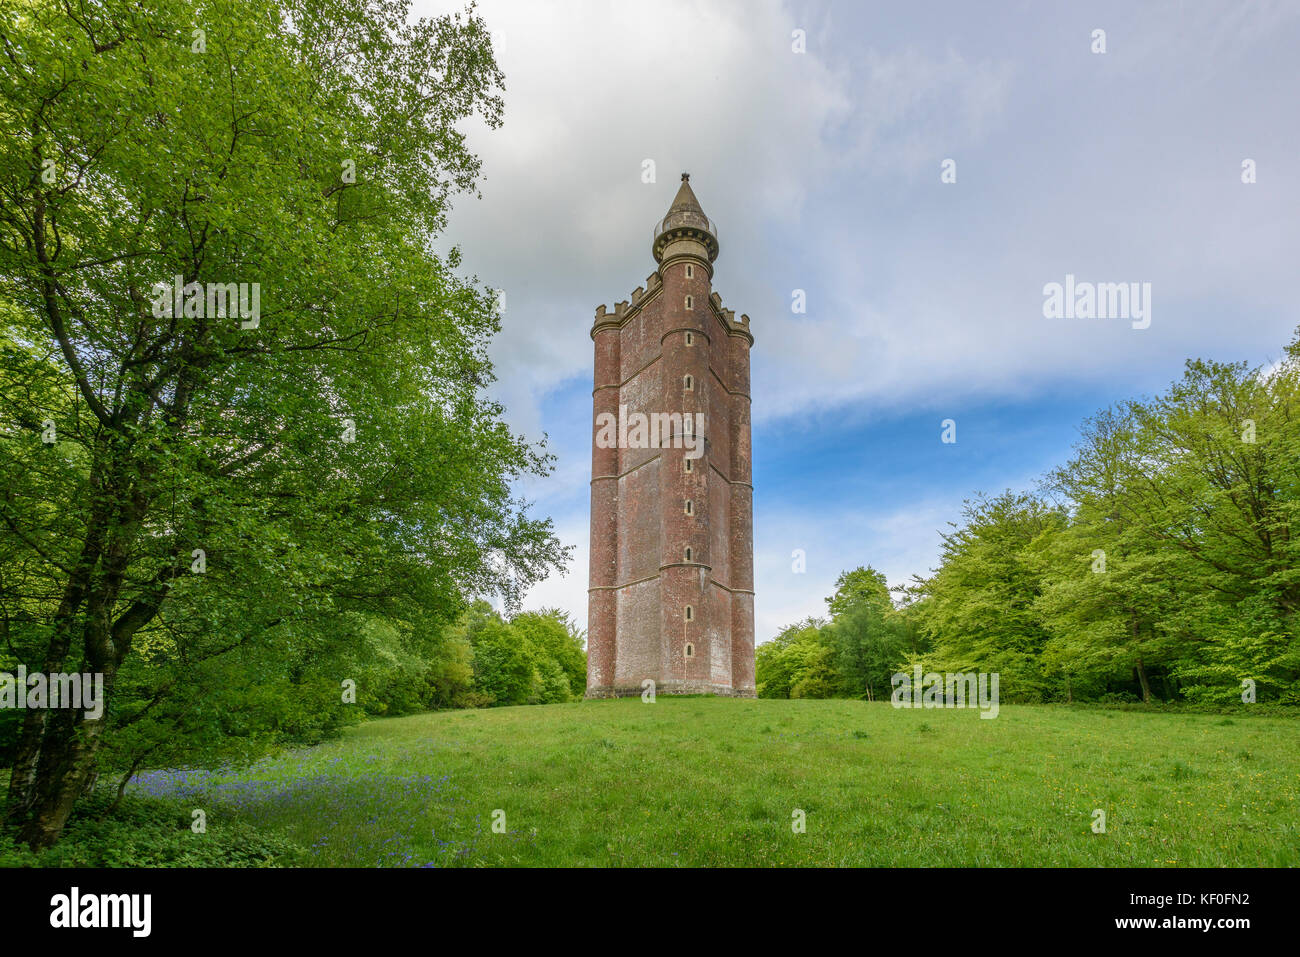 King Alfred's Tower, auch bekannt als The Folly of King Alfred the Great oder Stourton Tower, ist ein Torfsturm in Brewham, Somerset. Stockfoto